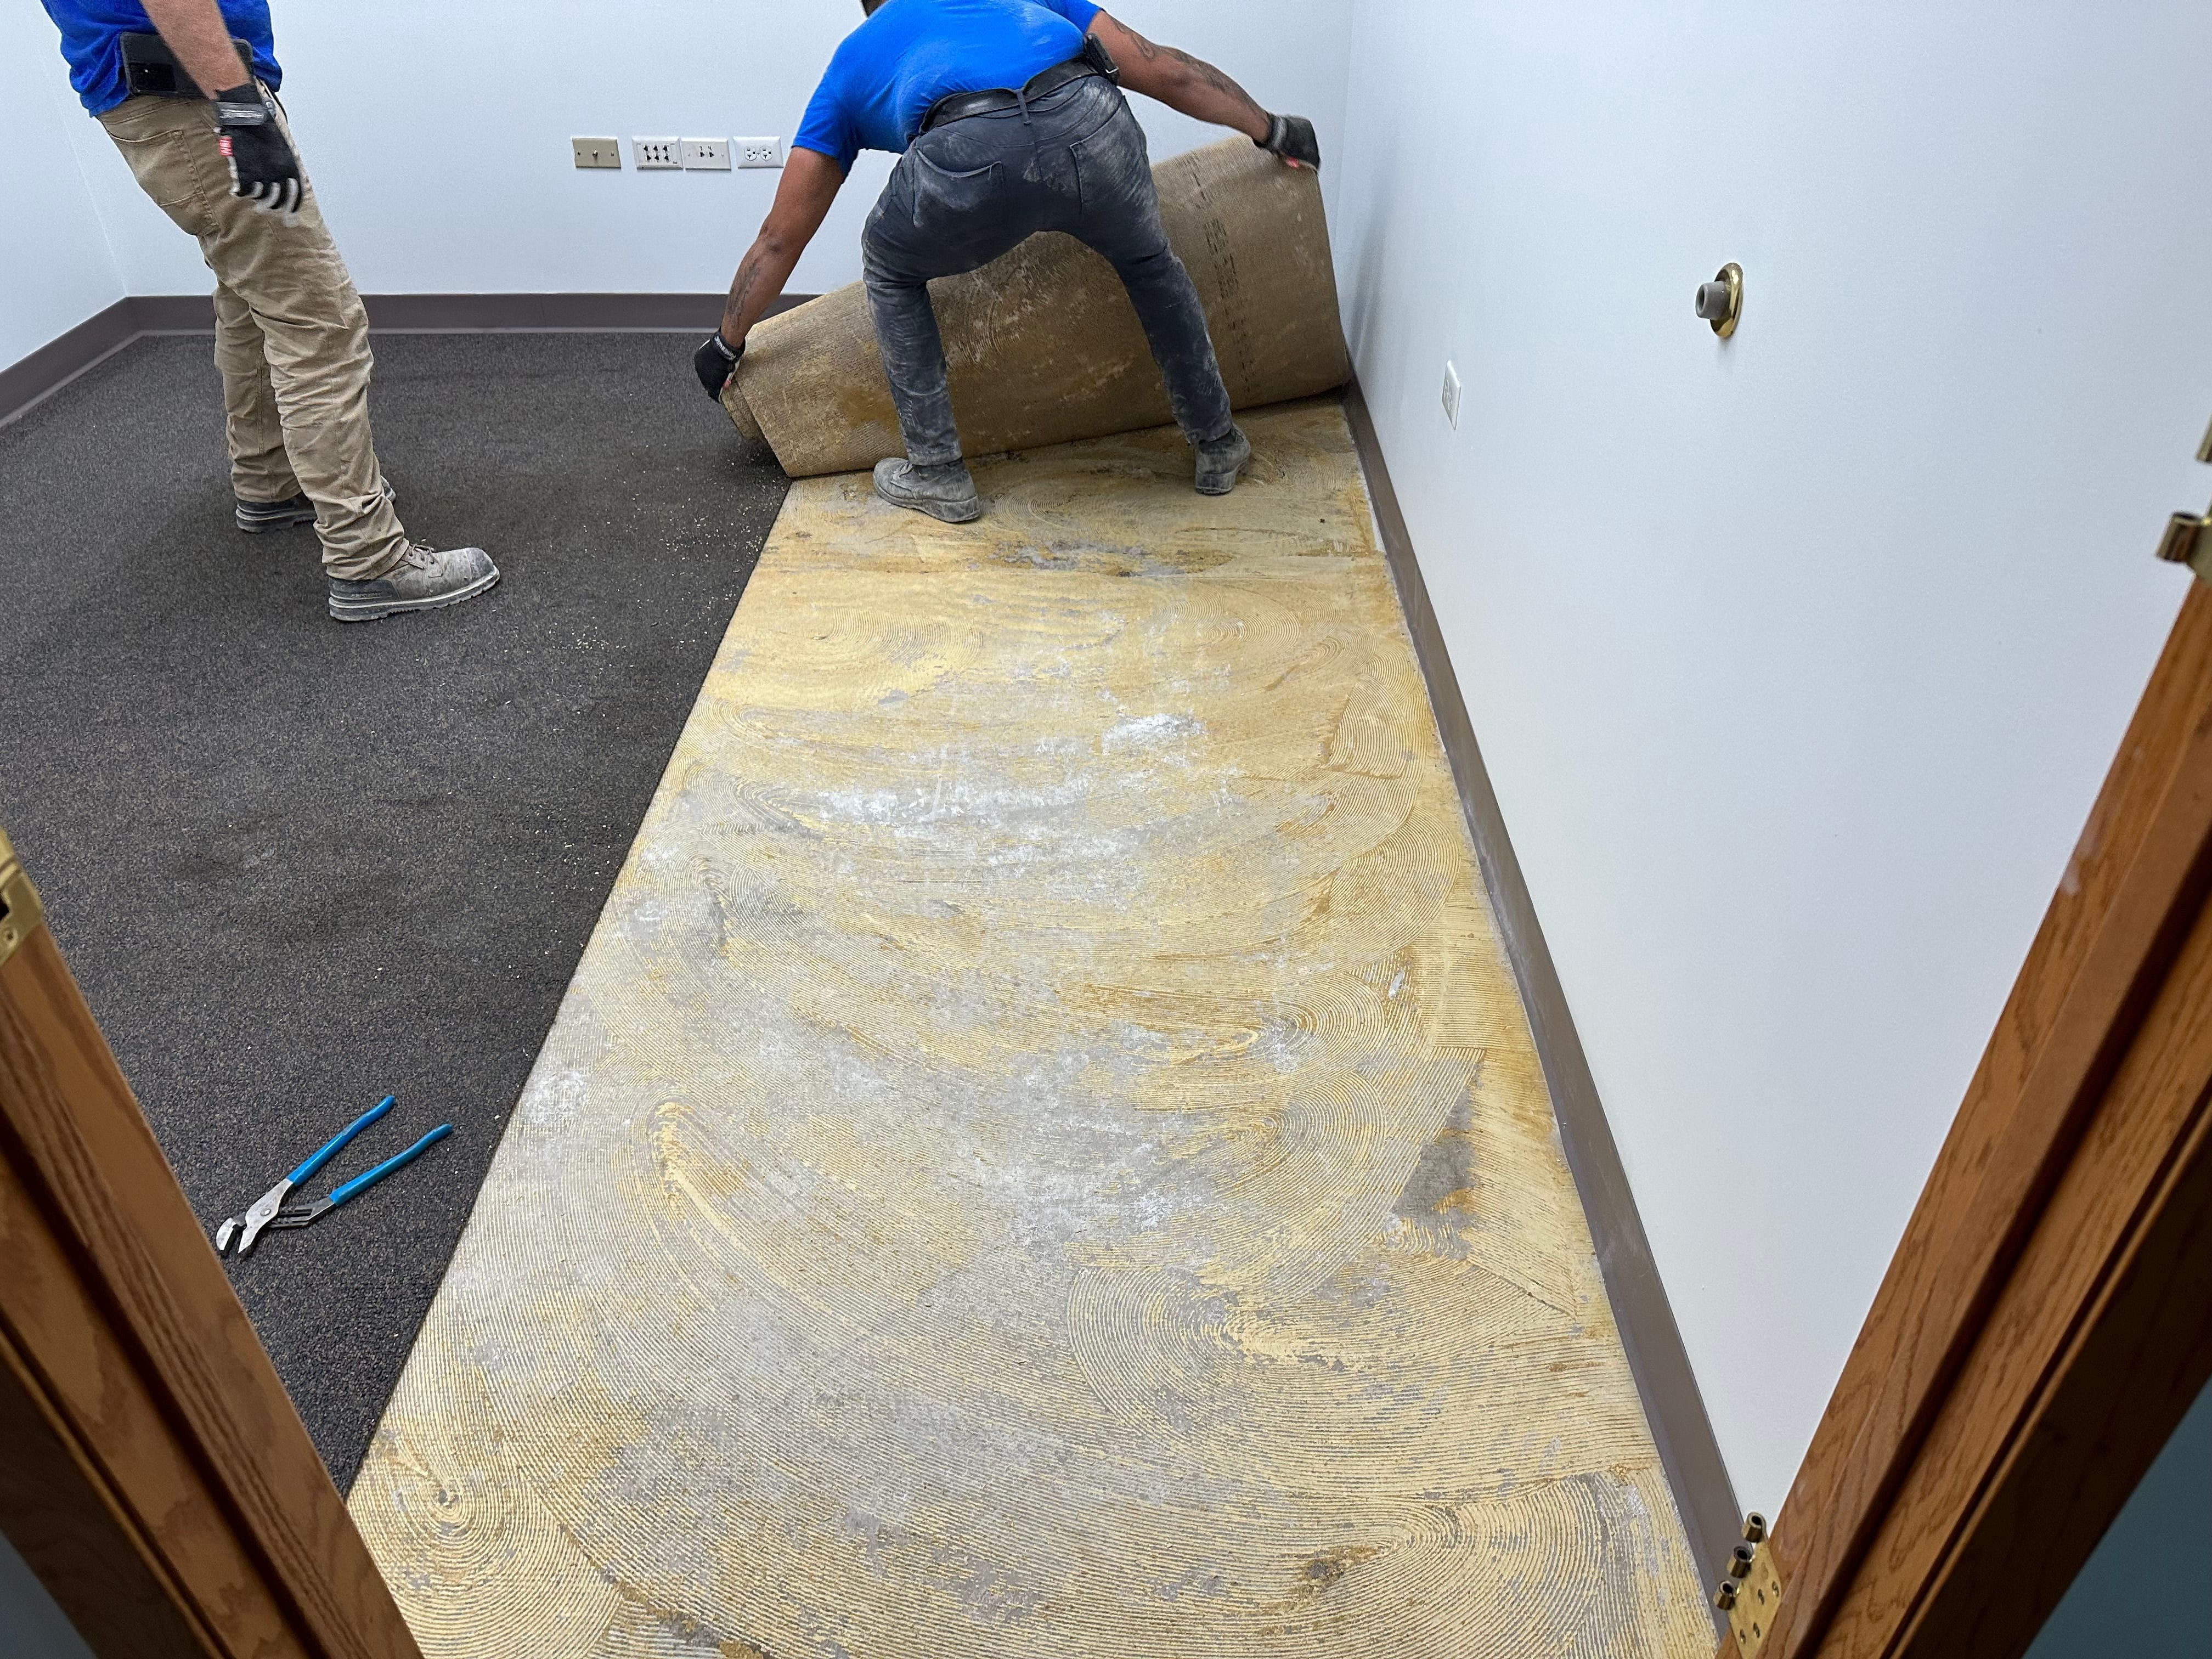 removing carpet to repurpose office space to warehouse space